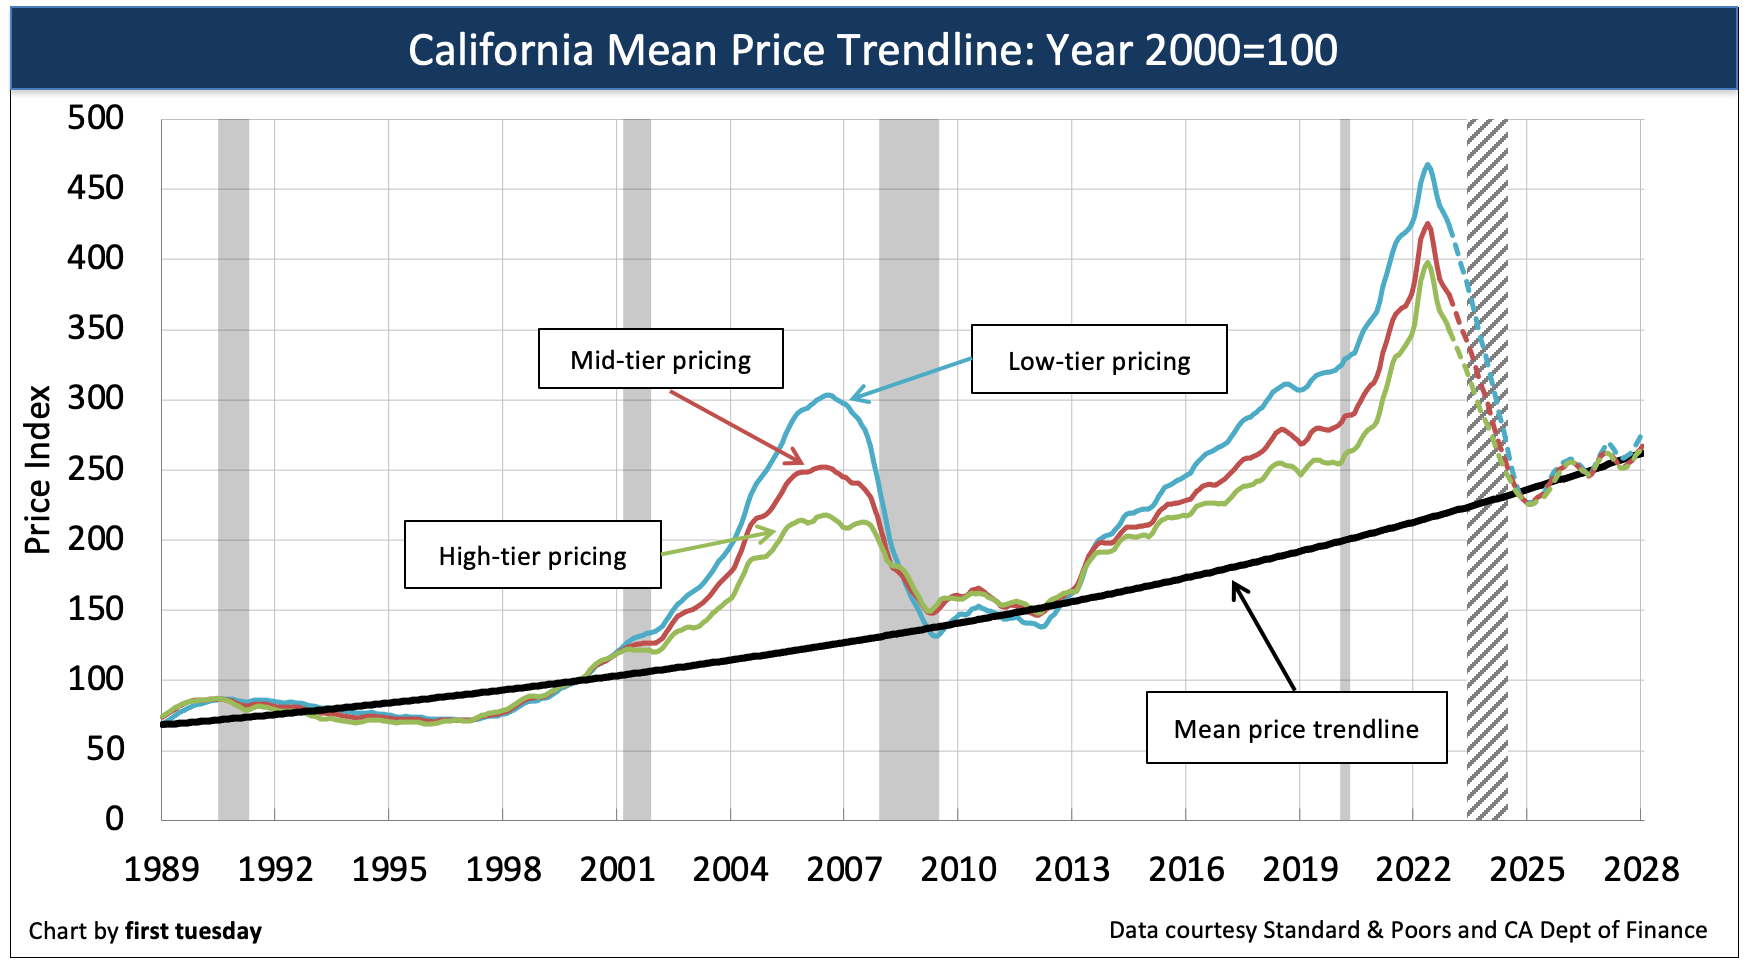 This chart shows home prices in California's three price tiers, alongside the mean price trendline. It shows a forecast for home prices through 2028.